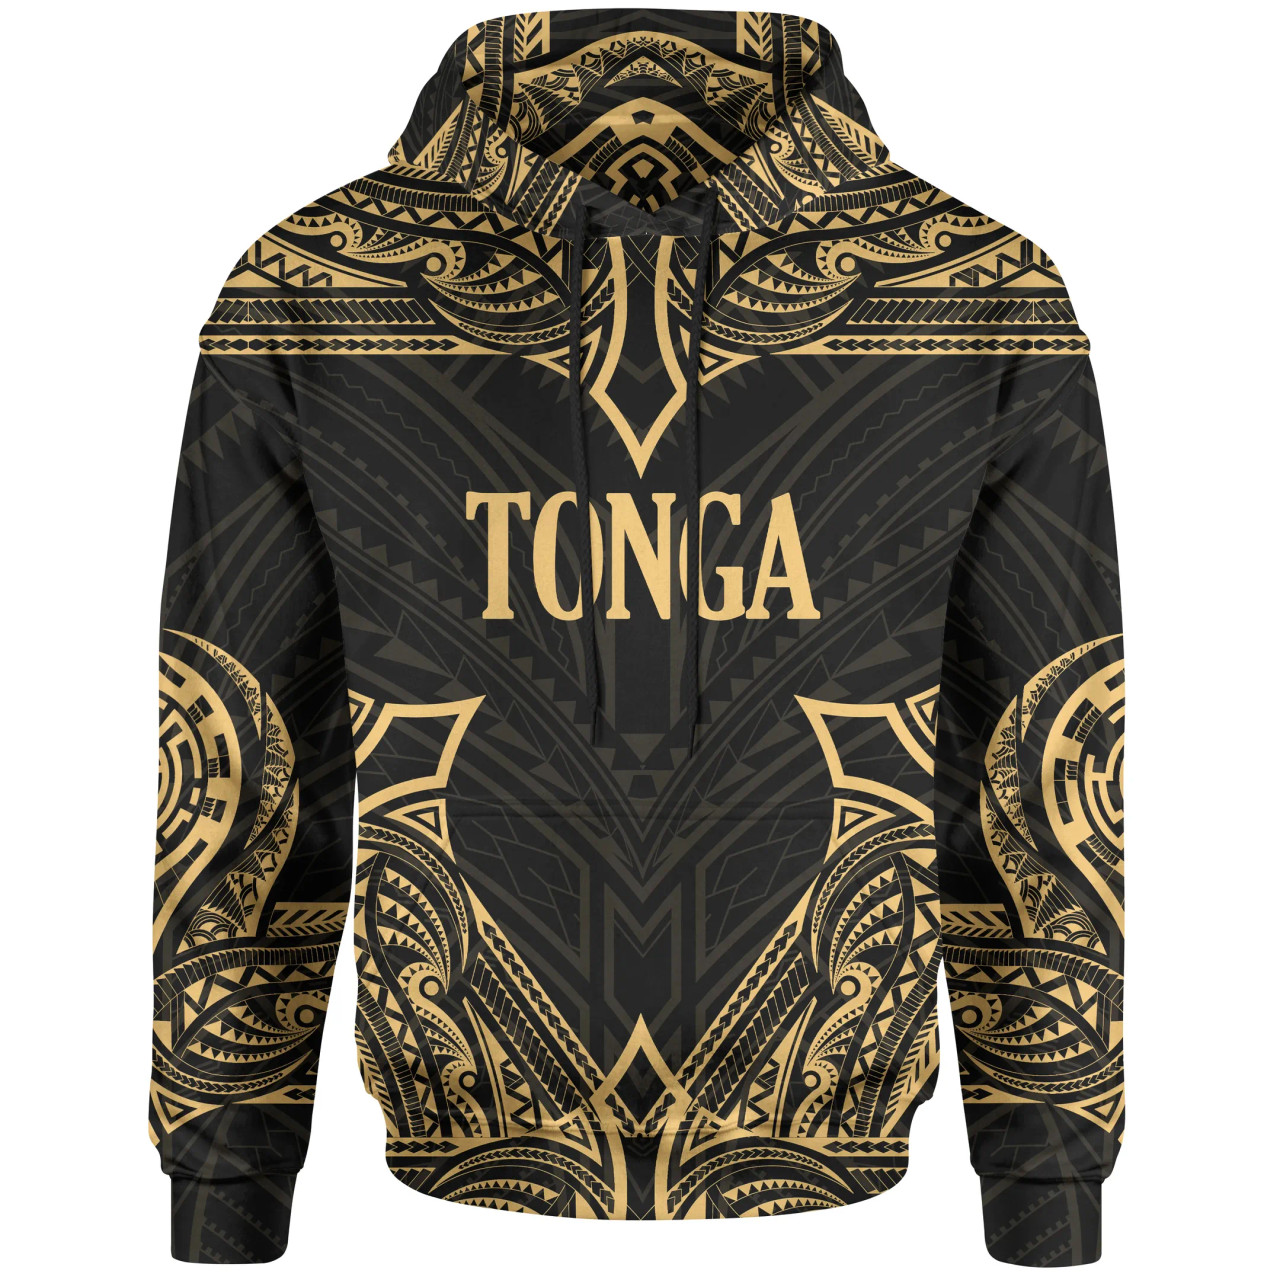 Tonga Hoodie - Coat Of rms With Patterns Gold Color